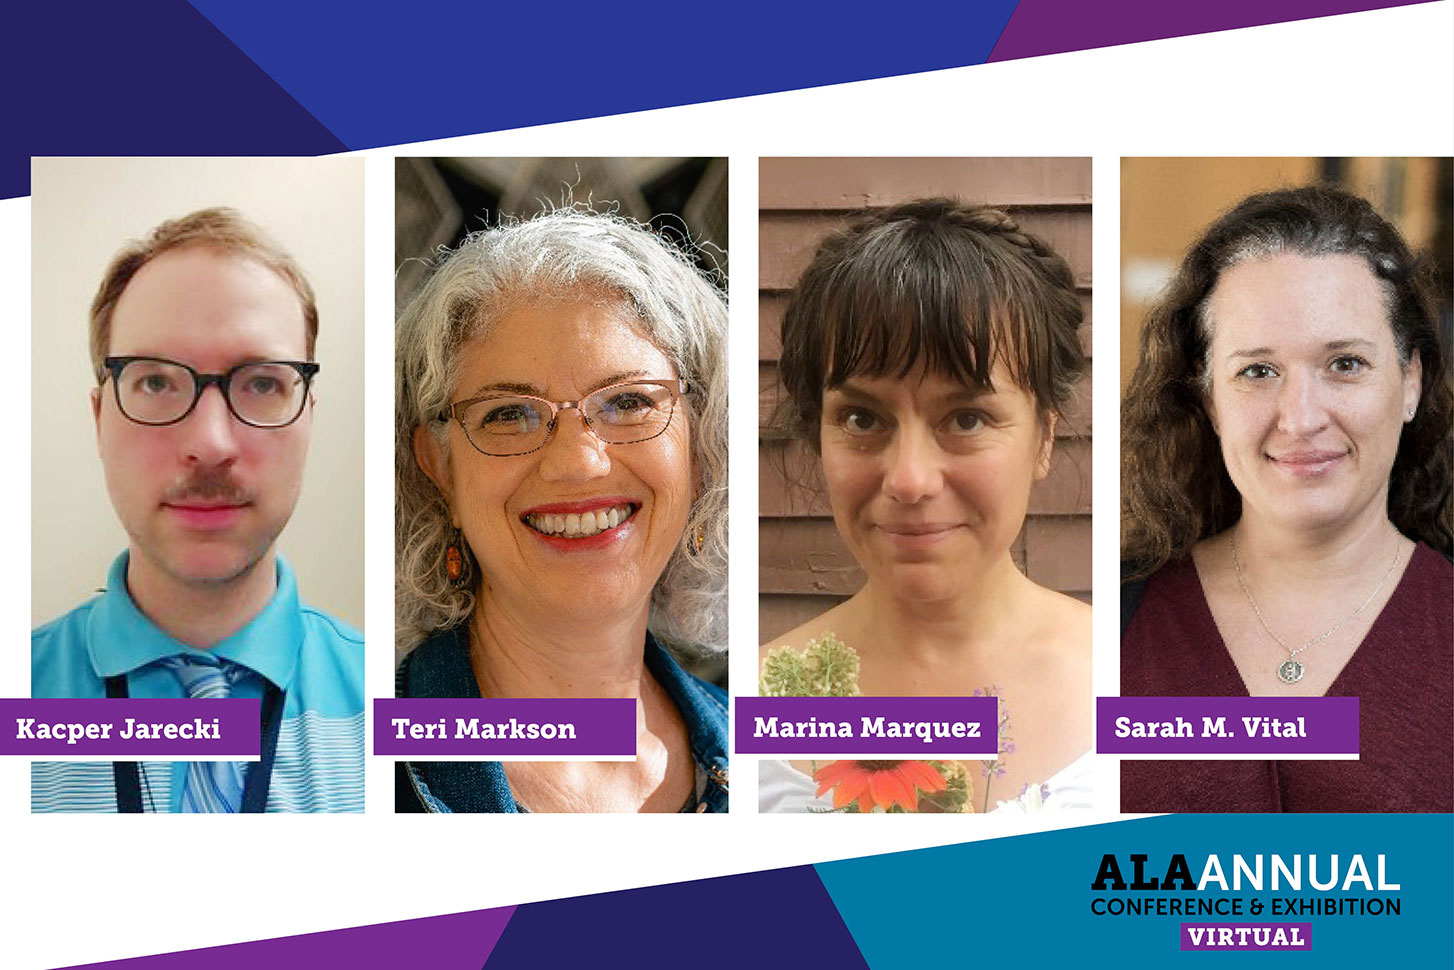 Headshots of four speakers from the “Sustainable Choices in Library Prizes and Promotional Materials” panel at ALA 2021 Annual Conference